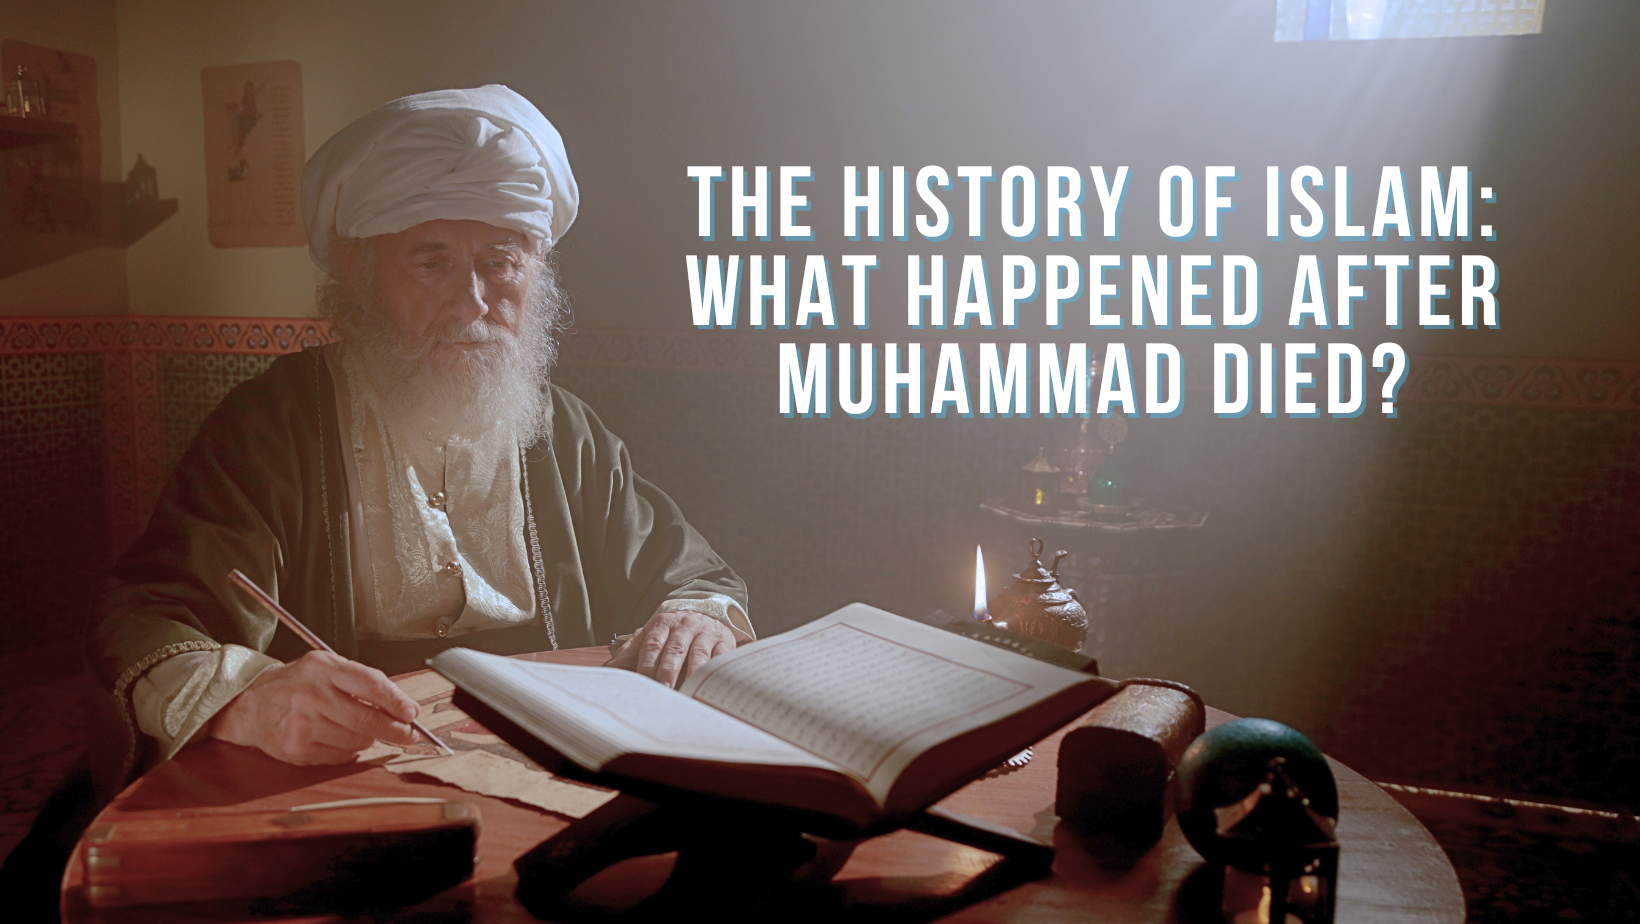 The history of Islam: What happened after Muhammad died?